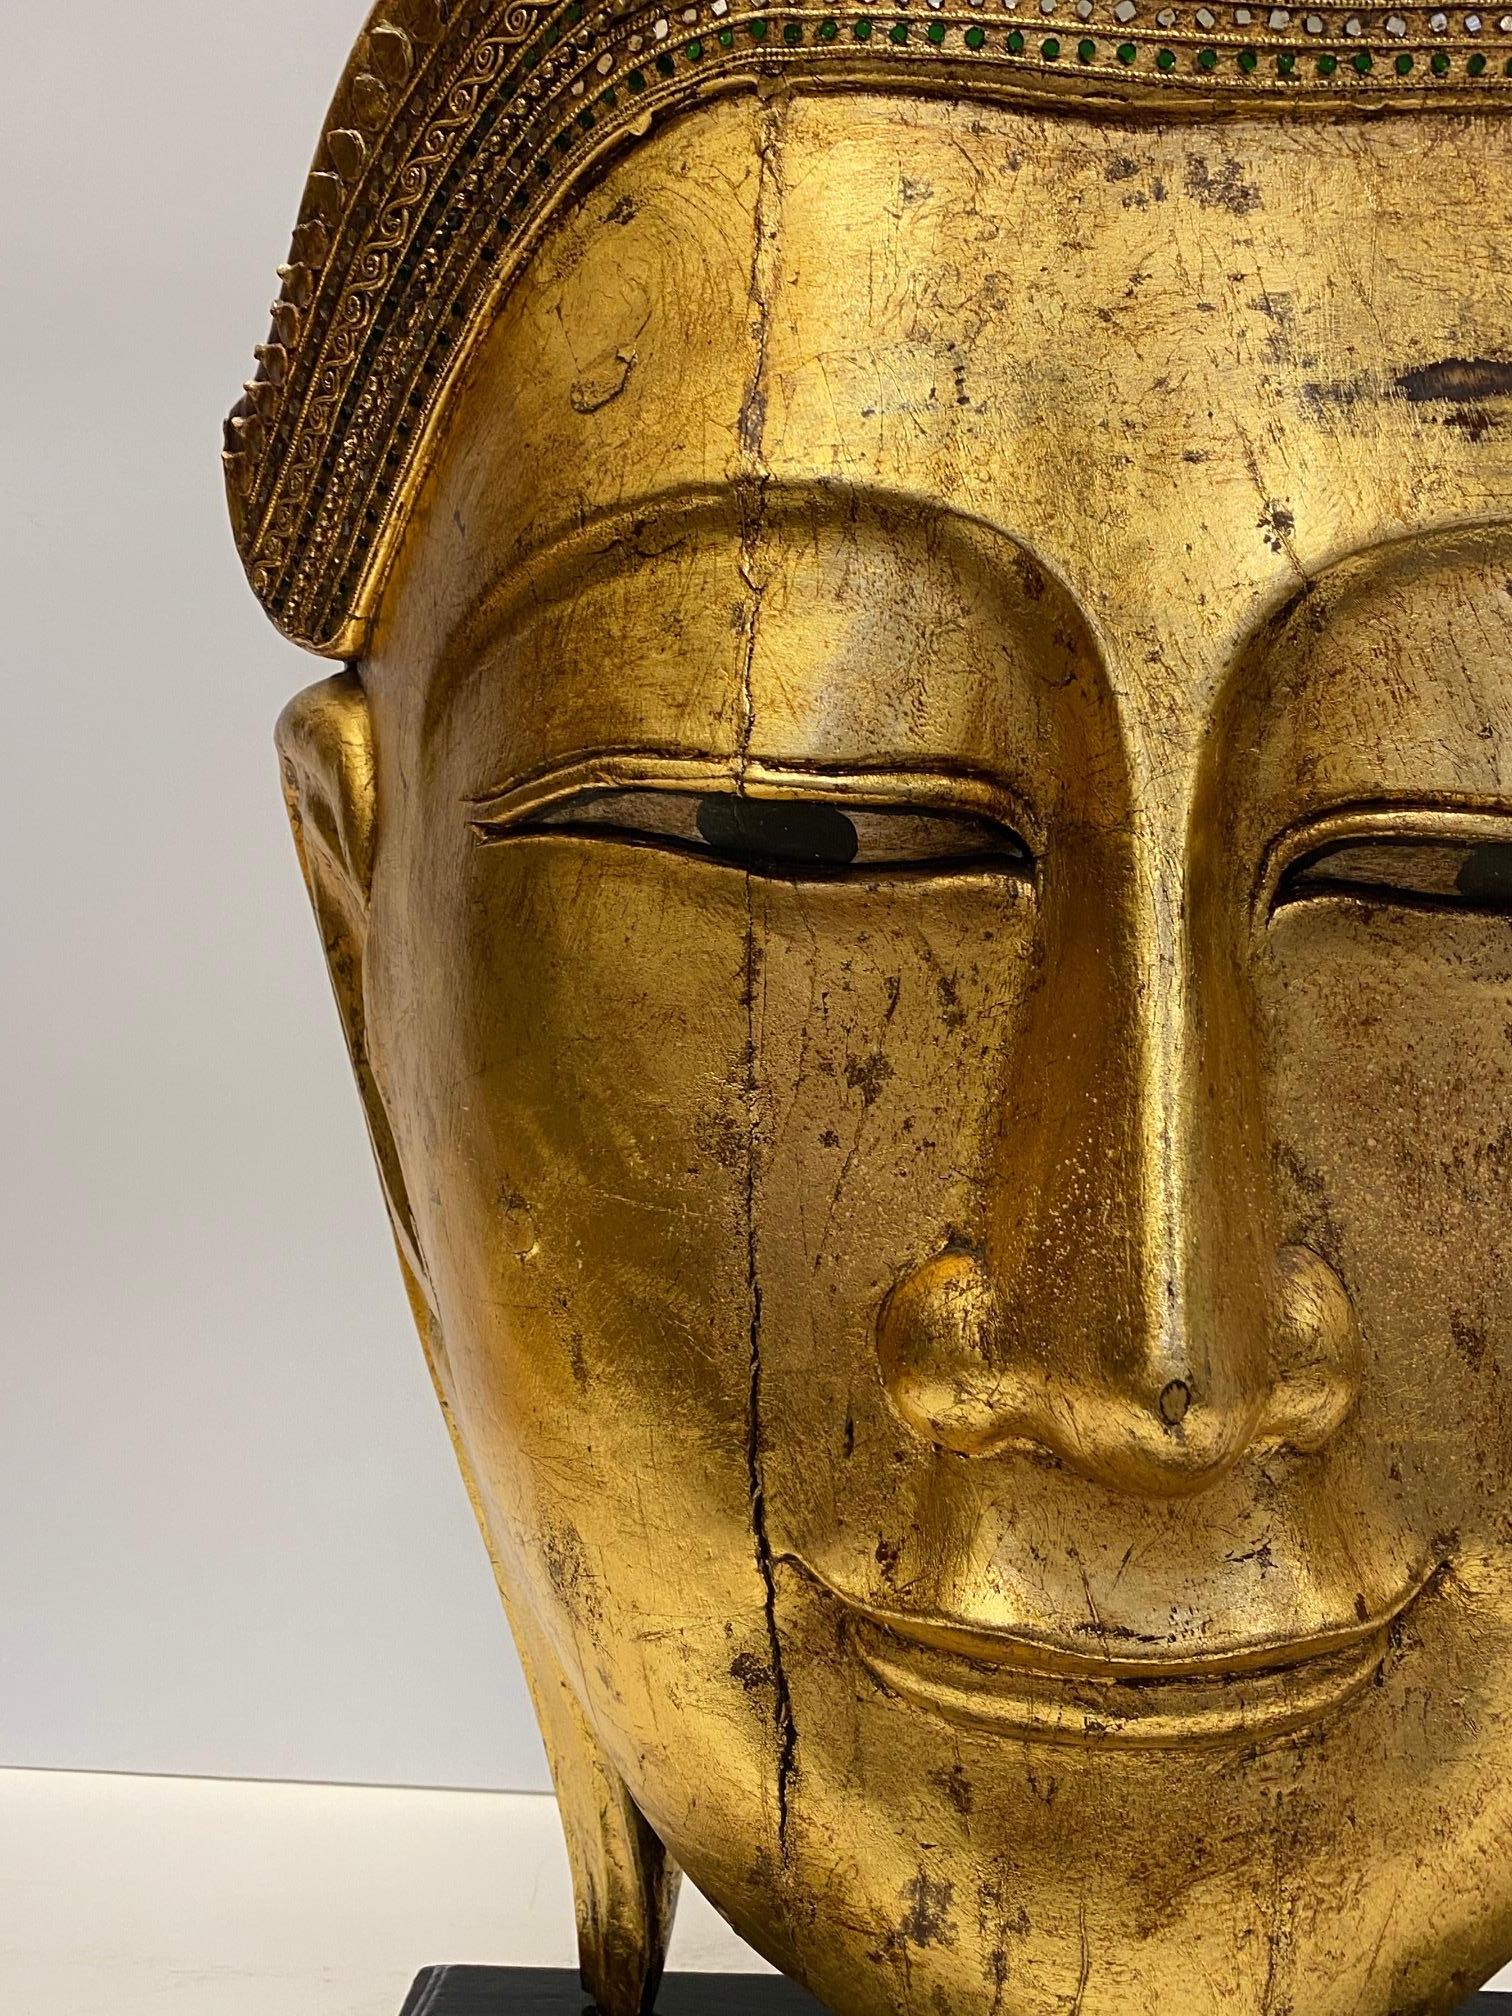 Magnificent Monumentally Large Carved Gilded Thai Buddha Head 8